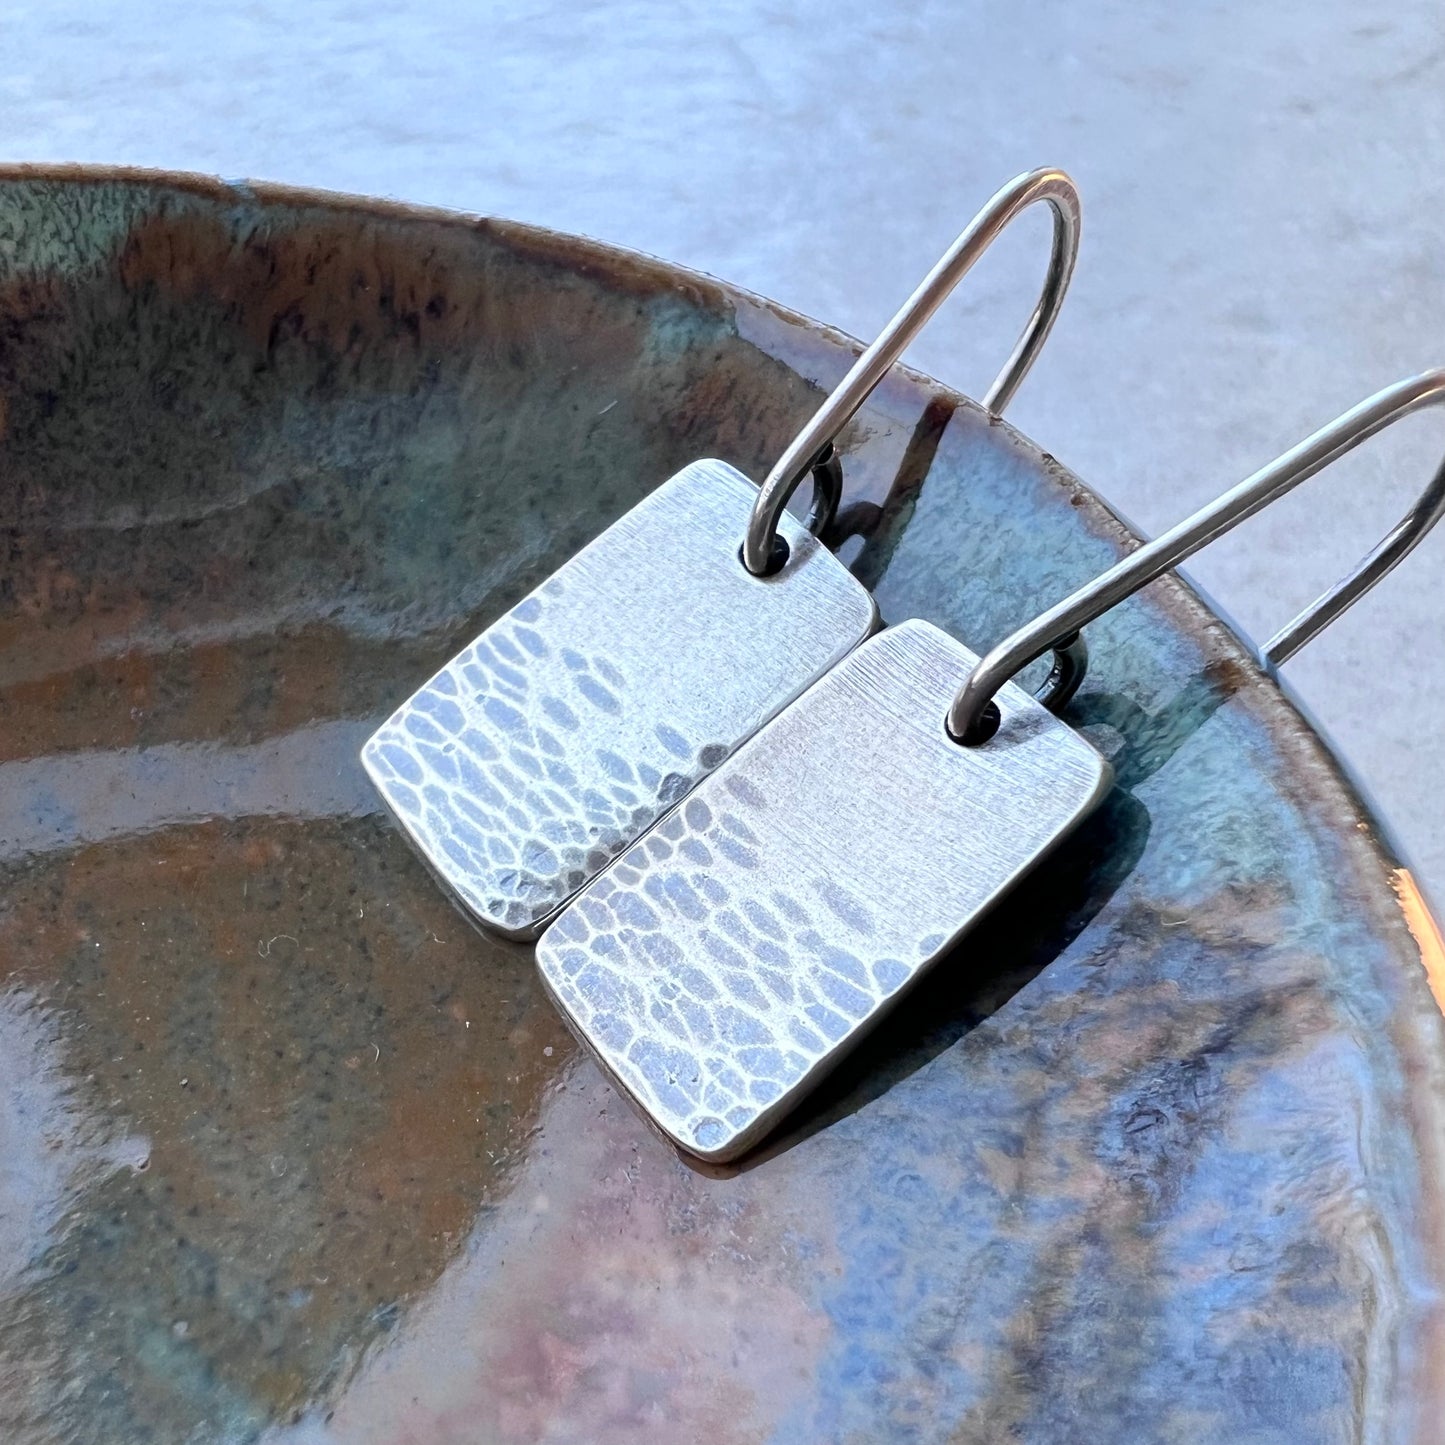 Rectangle Sterling Silver Earrings Solid Silver Hammered Rectangular Small Everyday Earrings